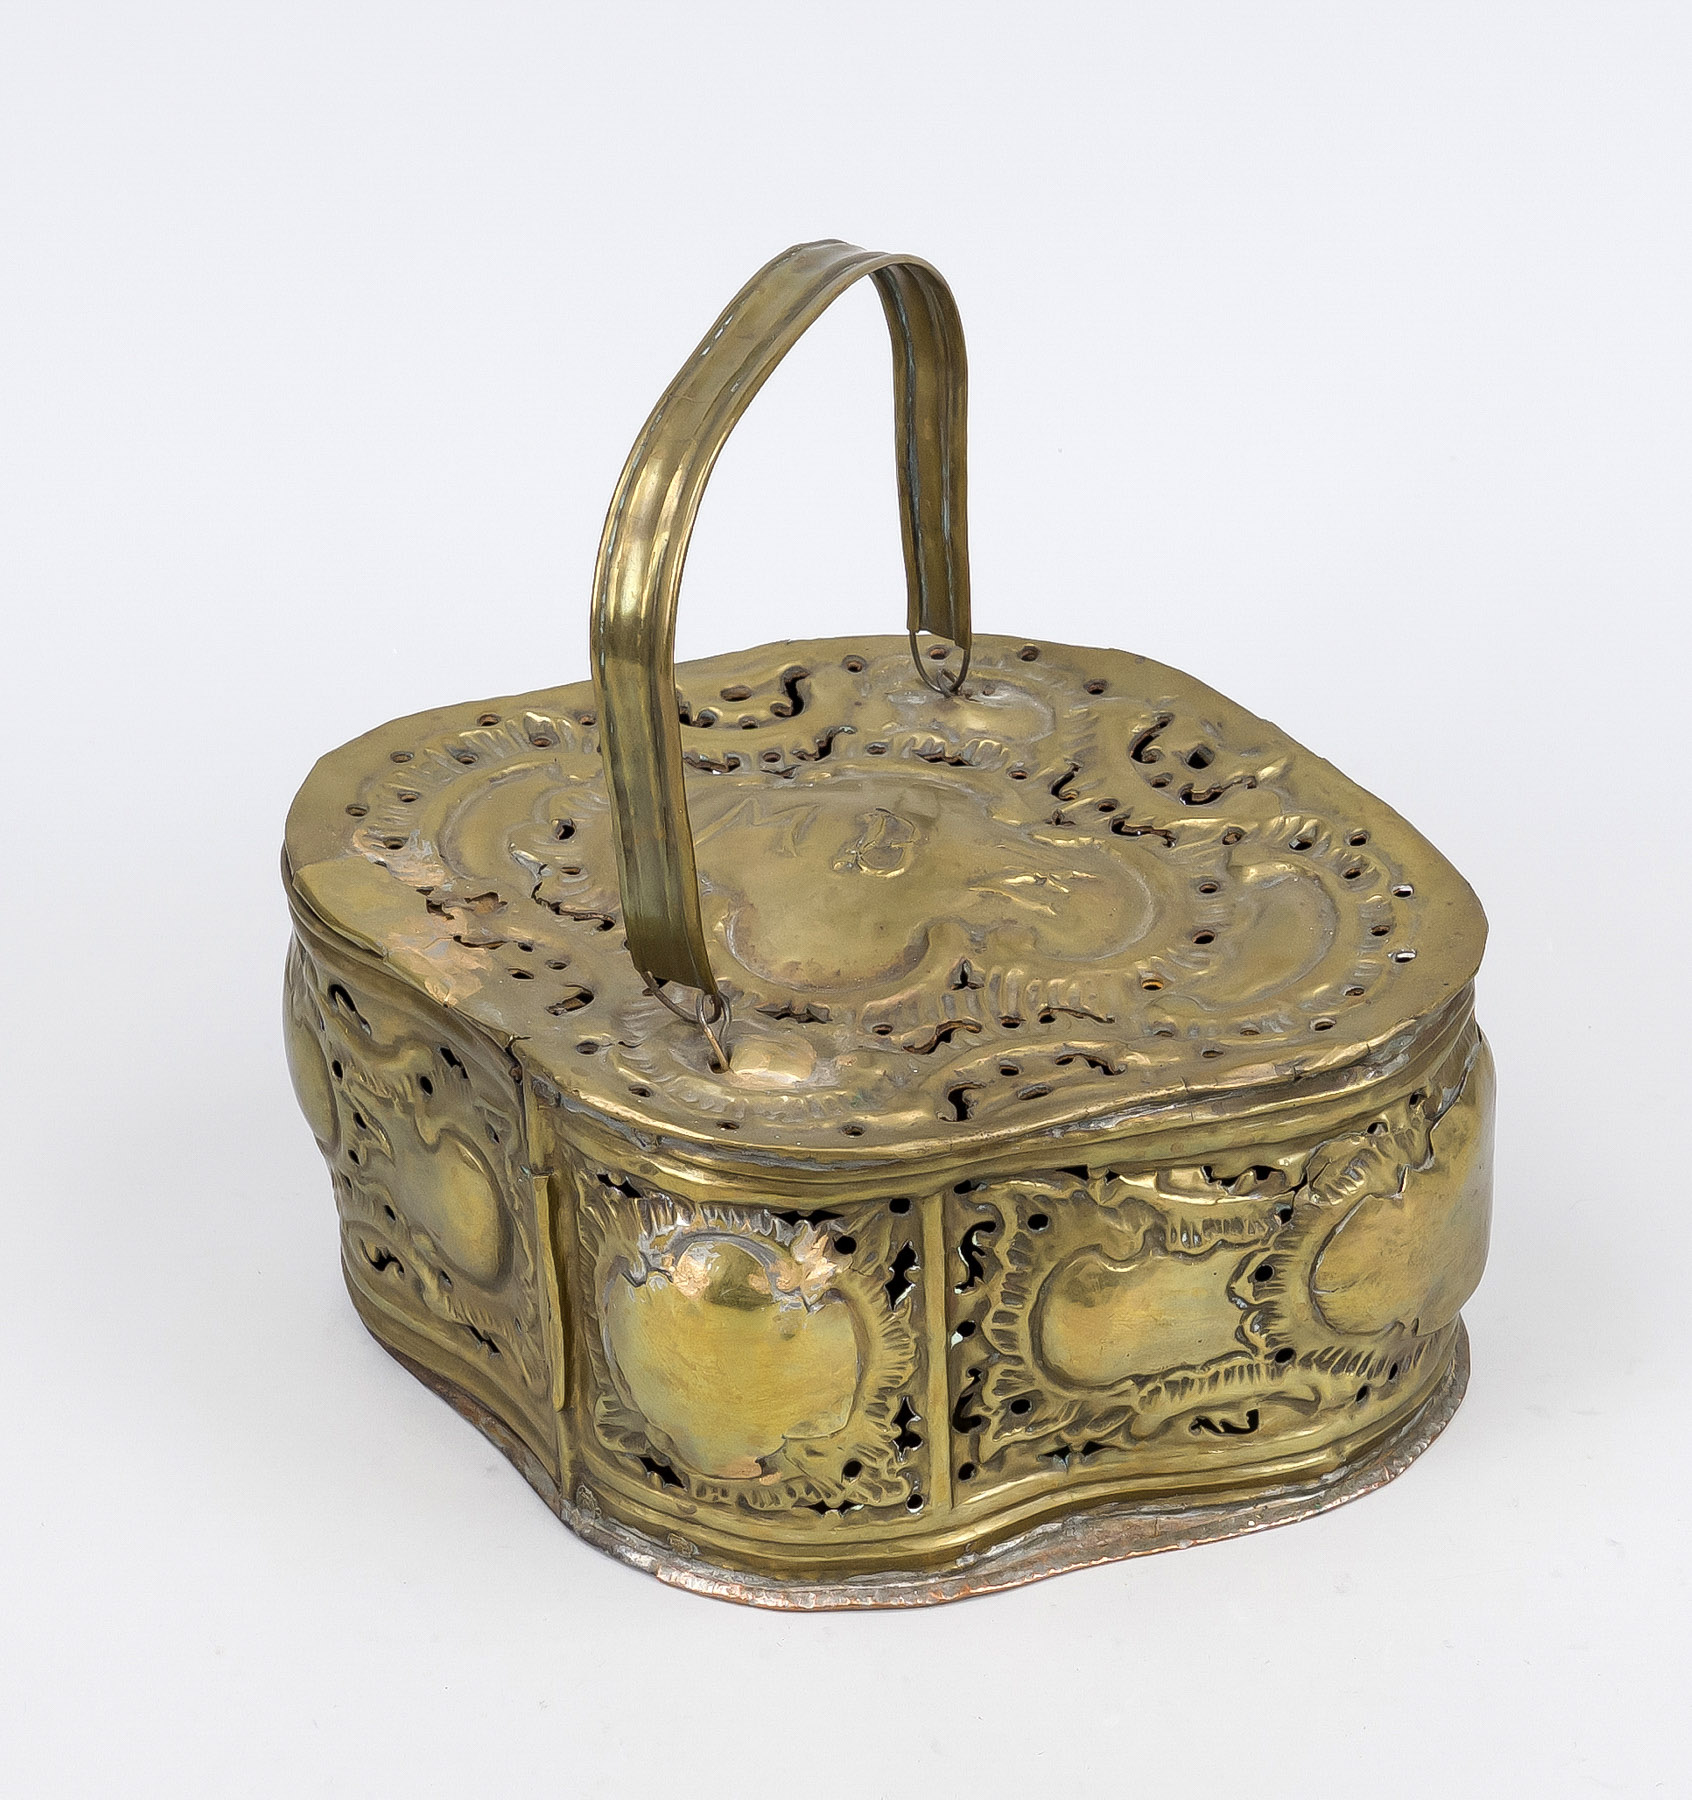 Baroque fire bowl, 18th century, sheet brass, sheet iron base, curved oval form with rocaille